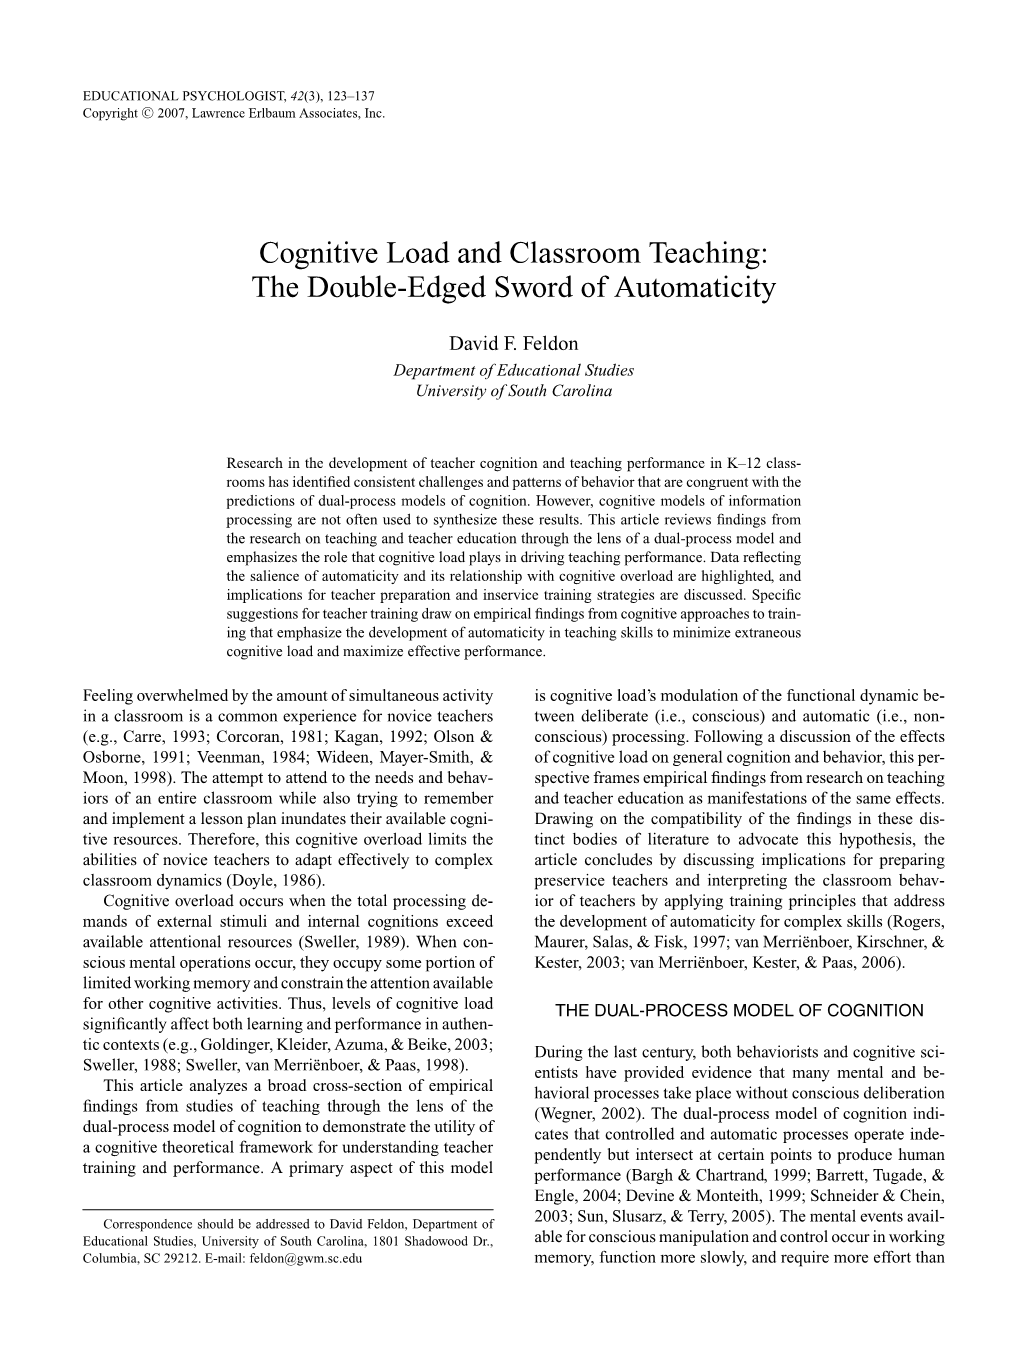 Cognitive Load and Classroom Teaching: the Double-Edged Sword of Automaticity